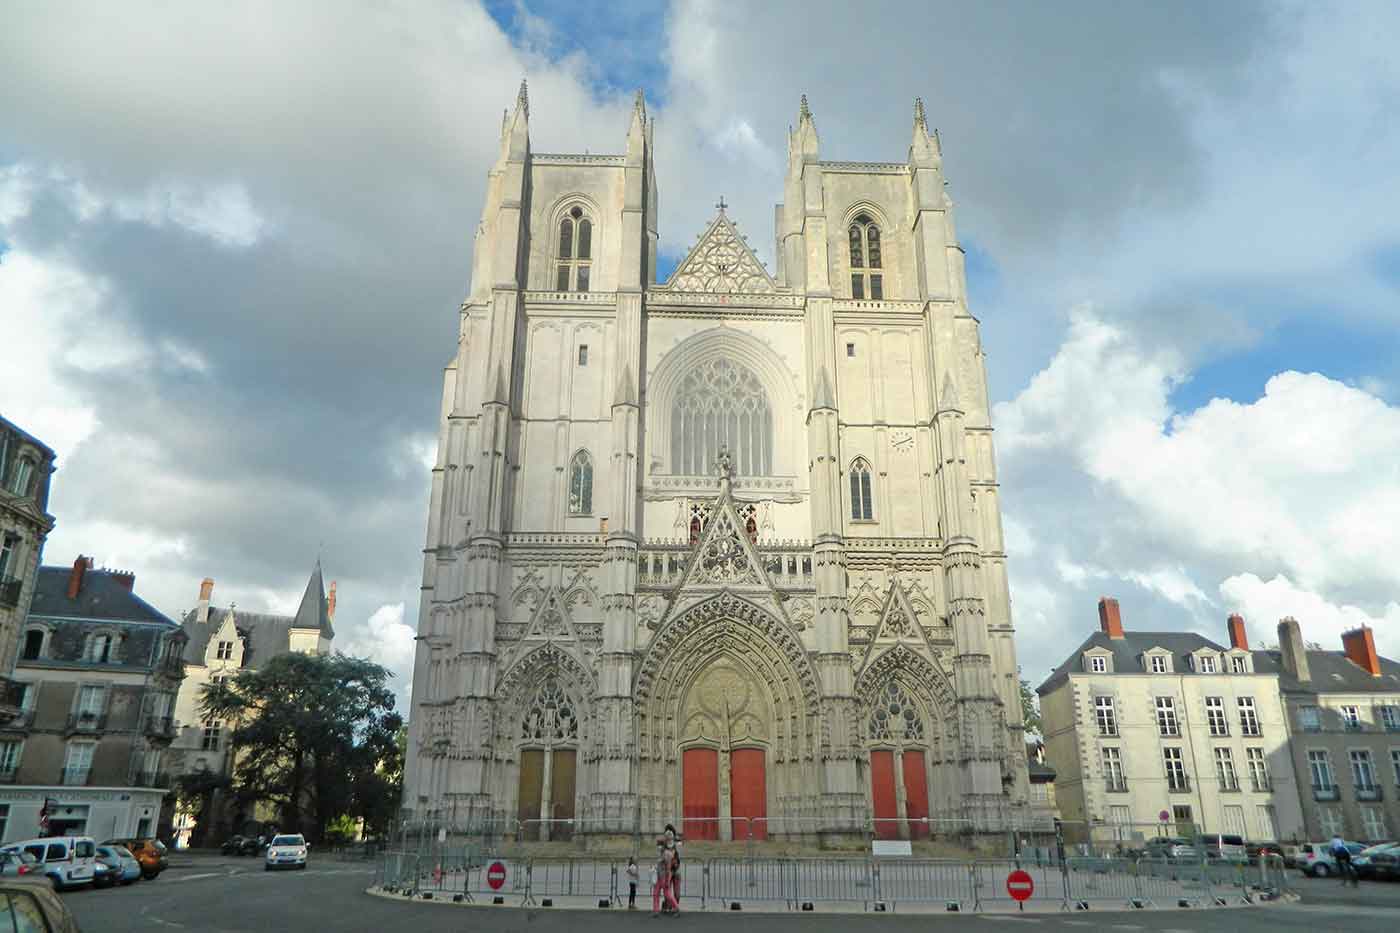 12+ Astonishing Tourist Attractions to See and Things to Do in Nantes, France